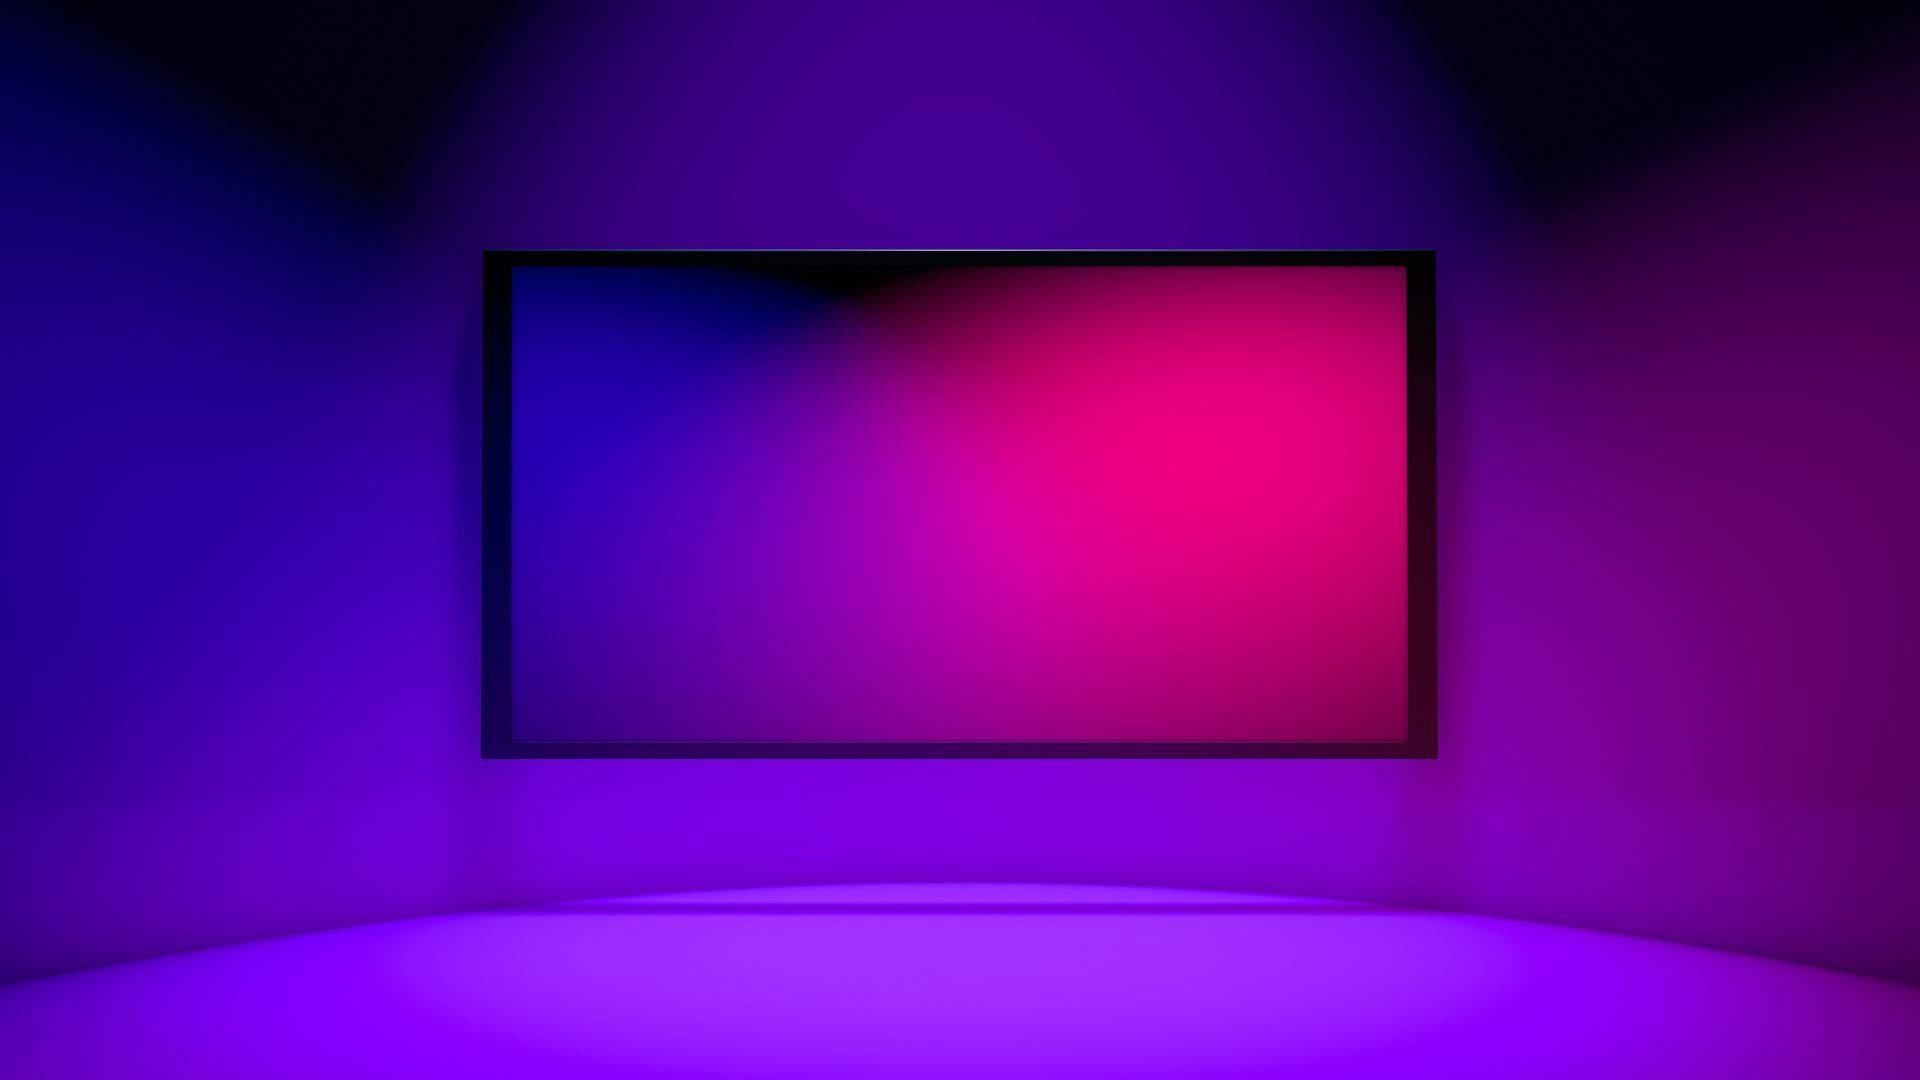 Caption: Neon Lit Television With Empty Screen